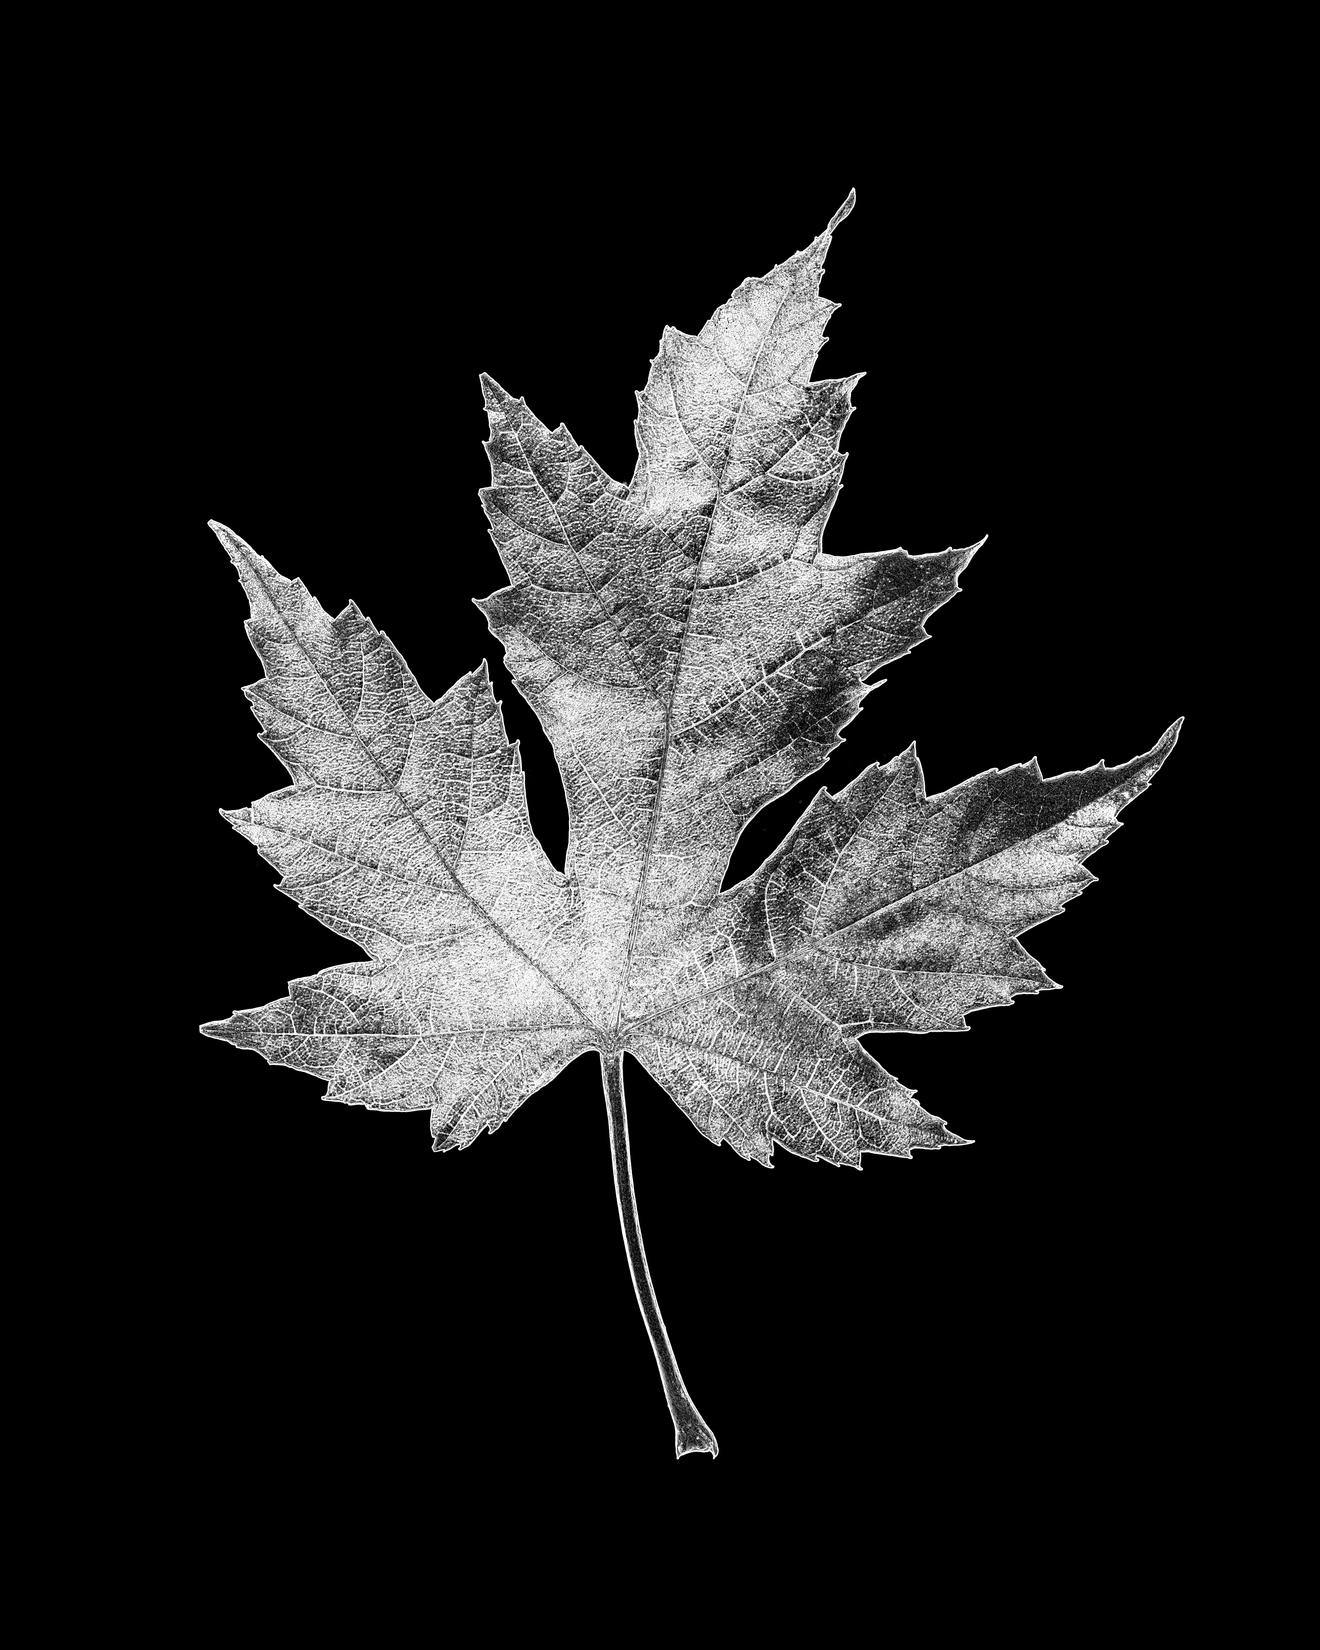 Black and white image of a Canadian maple leaf